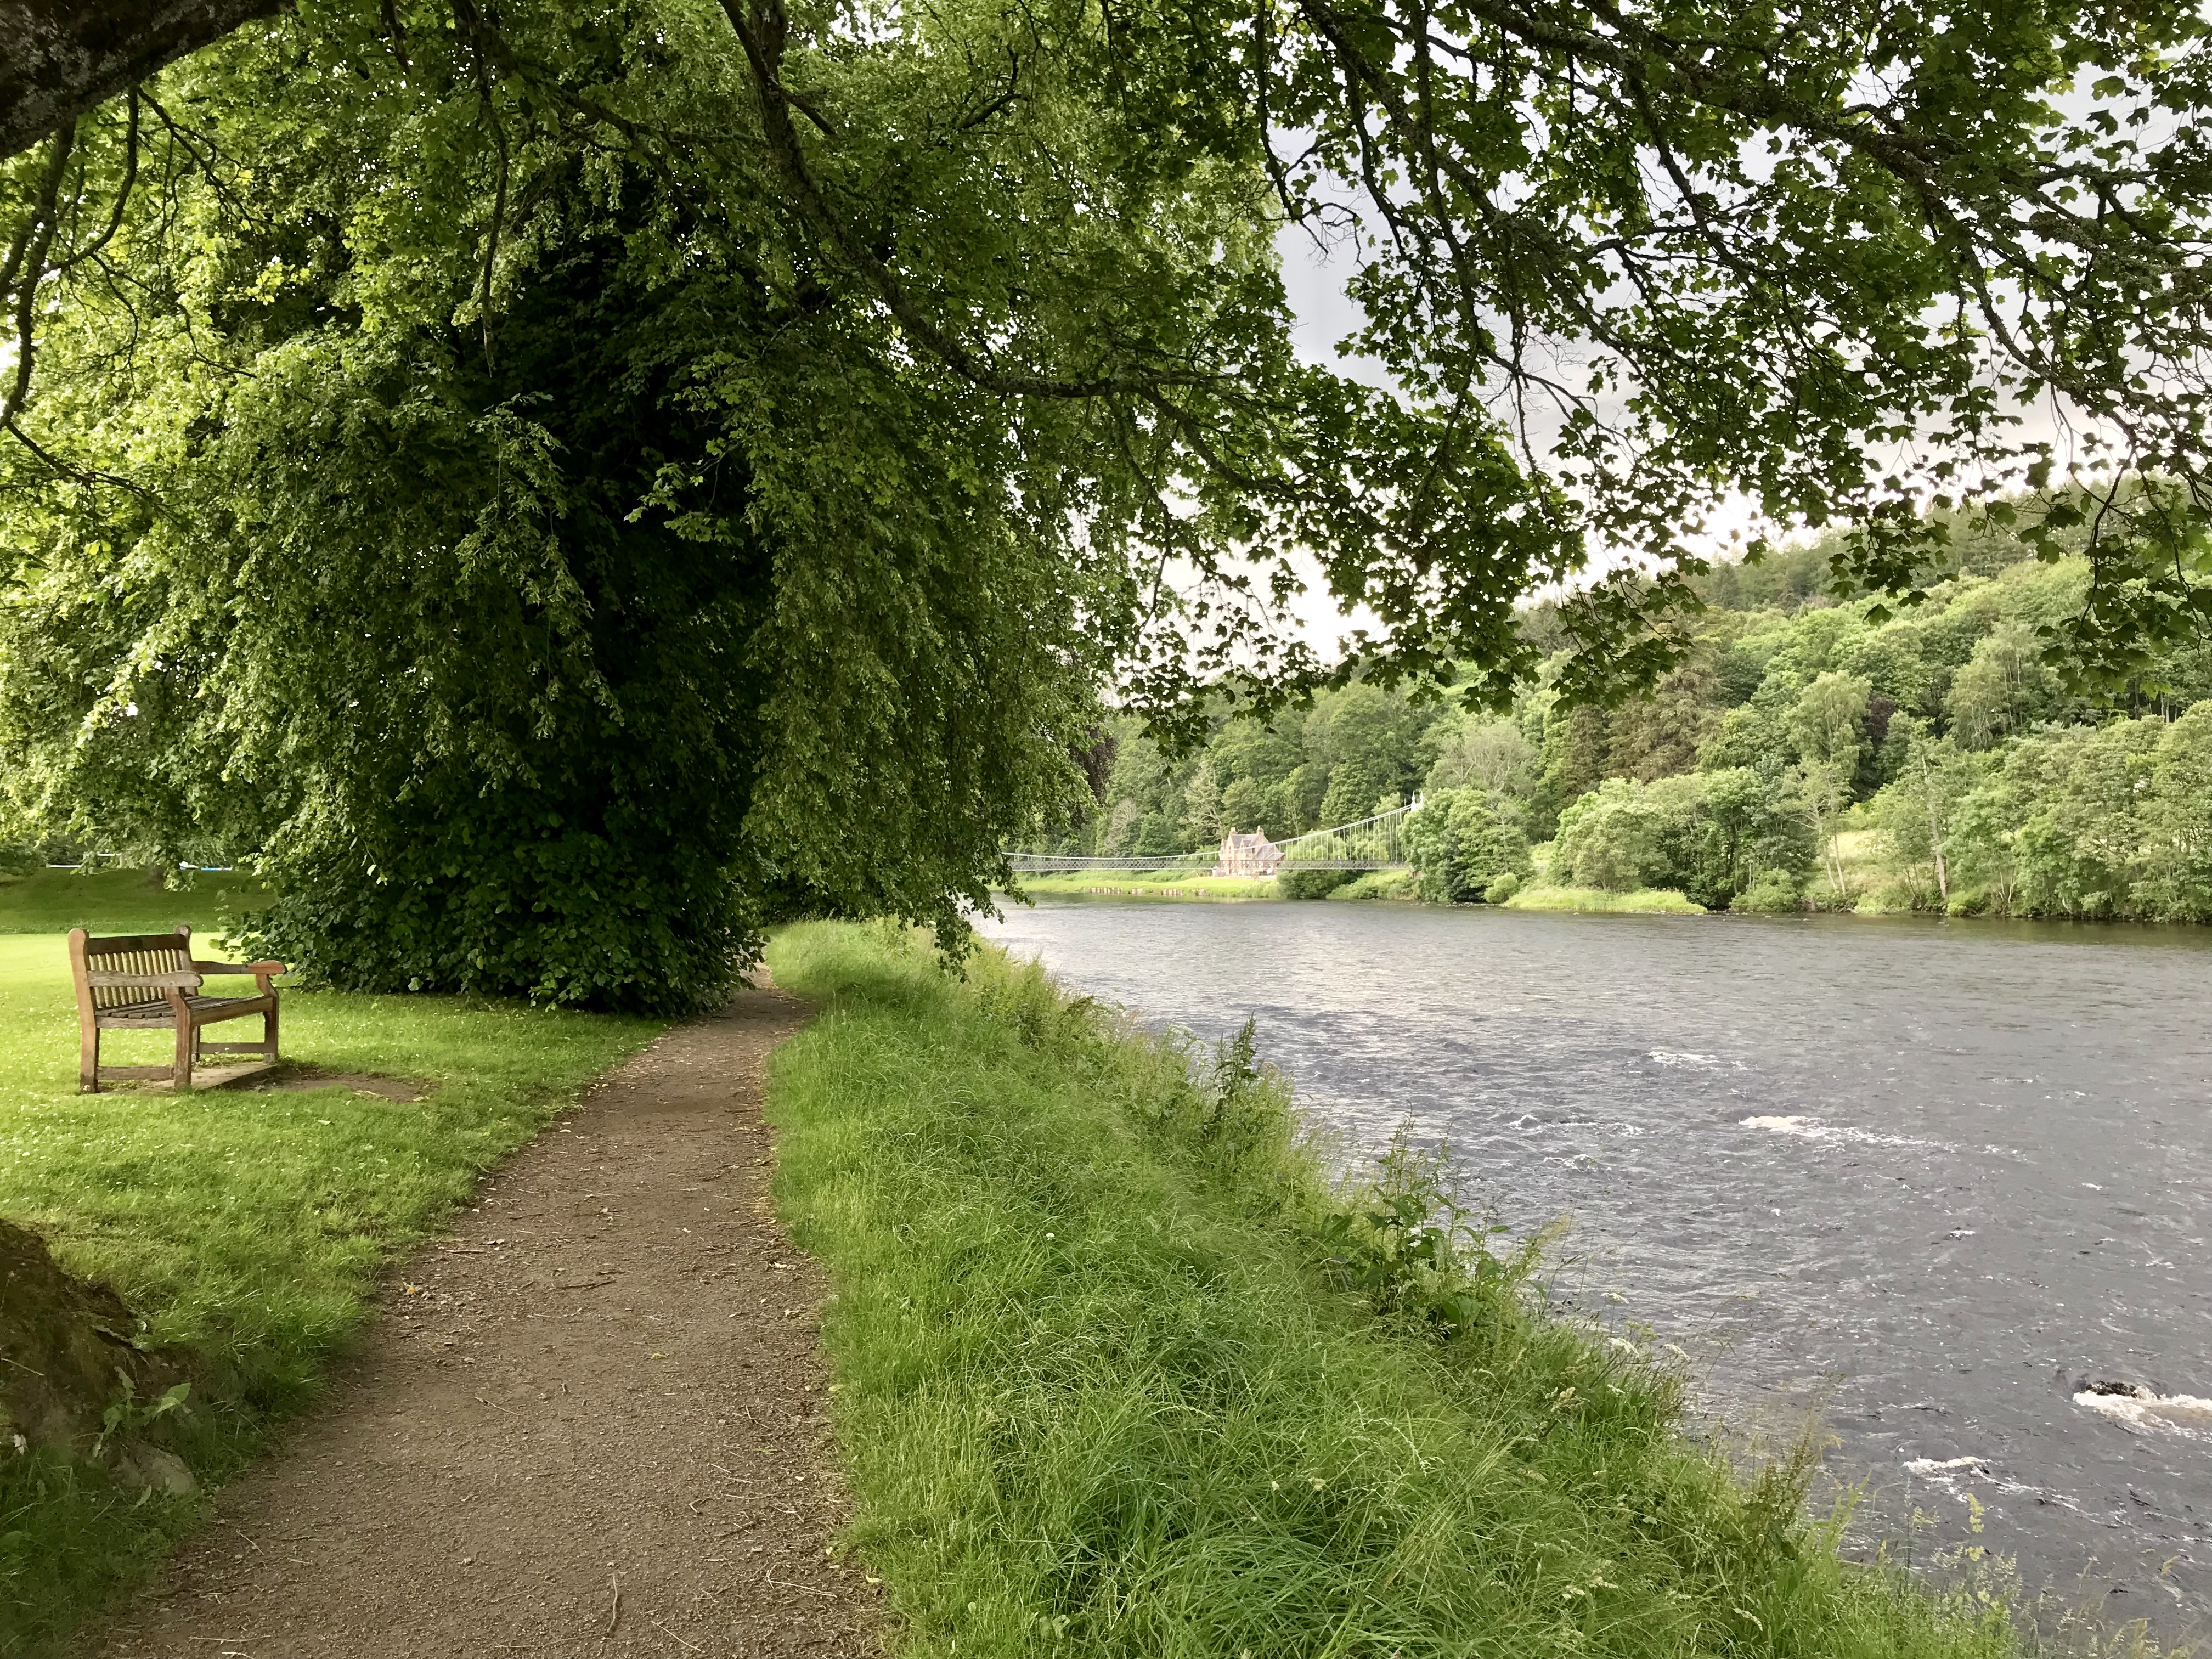 Walking along the River Spey, our bellies full of scotch.